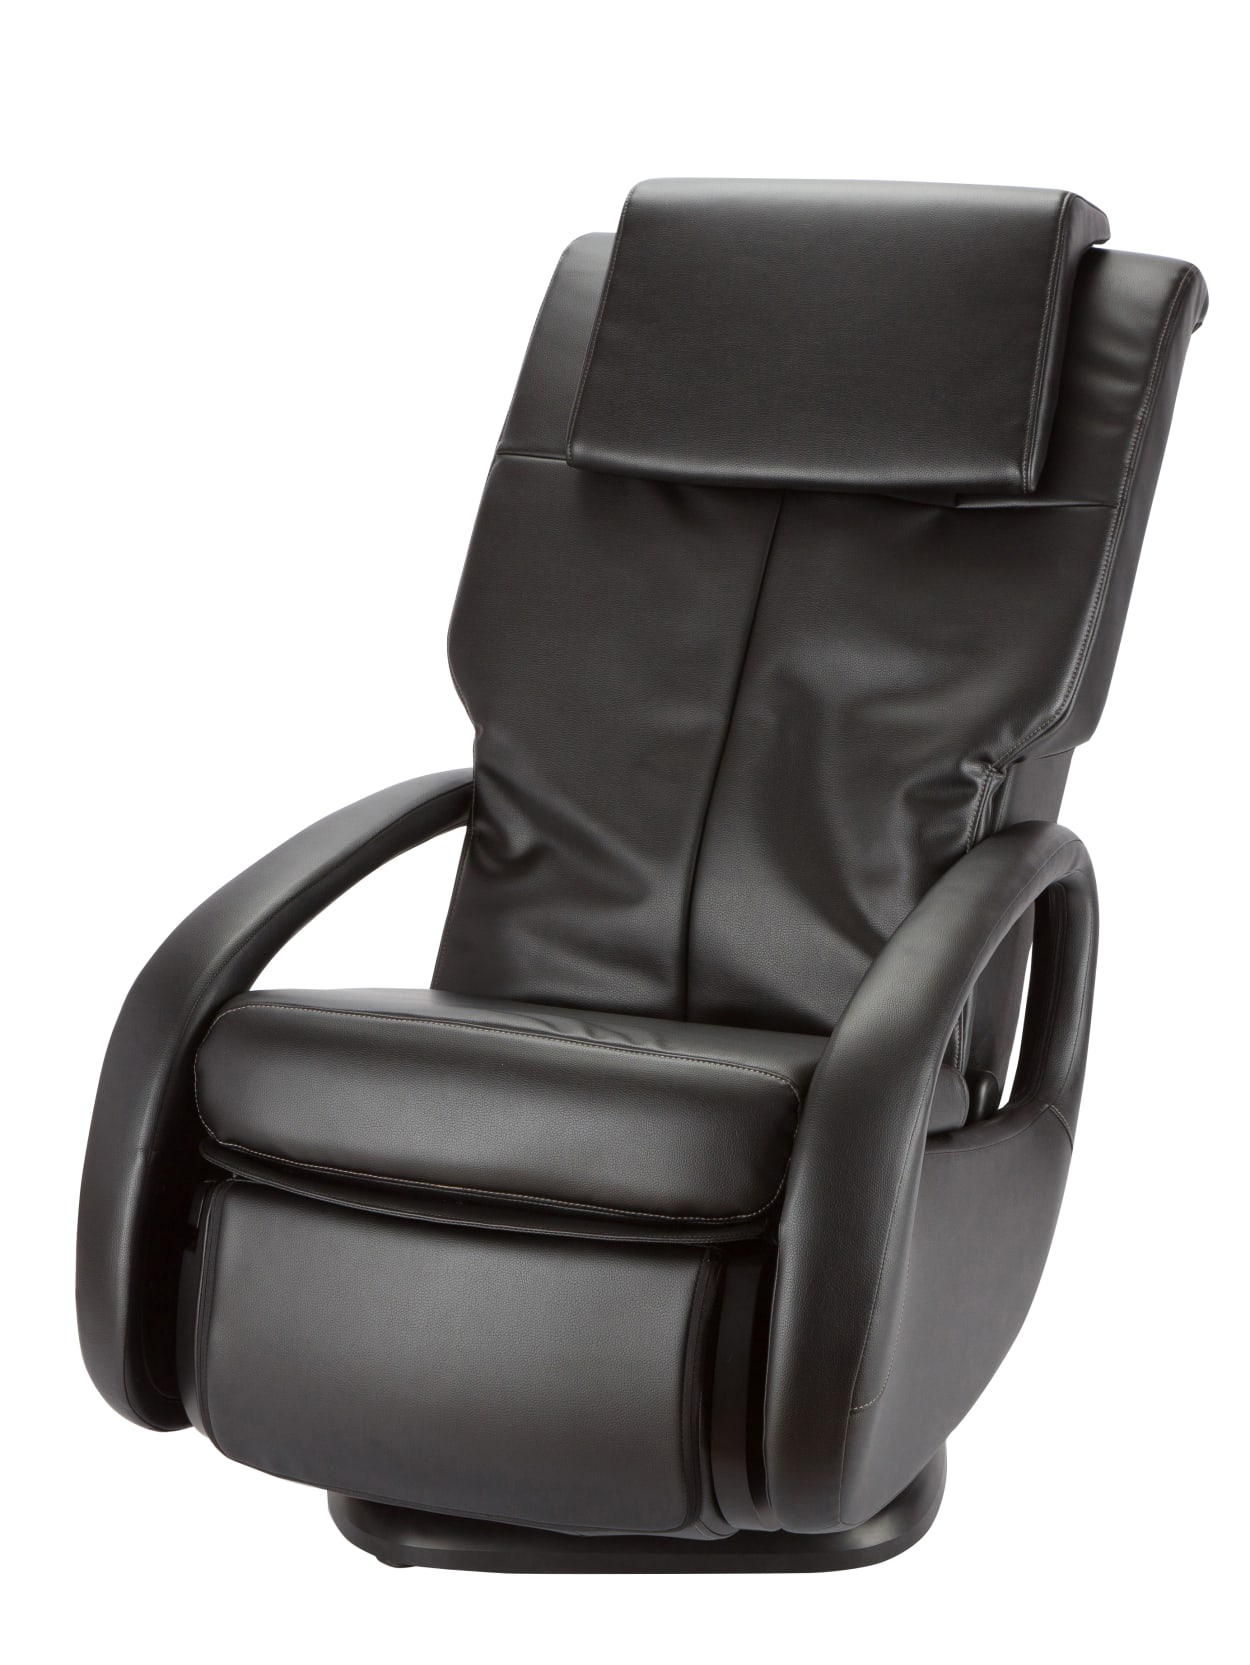 Human Touch Whole Body 7 1 Massage Chair Black Office Depot